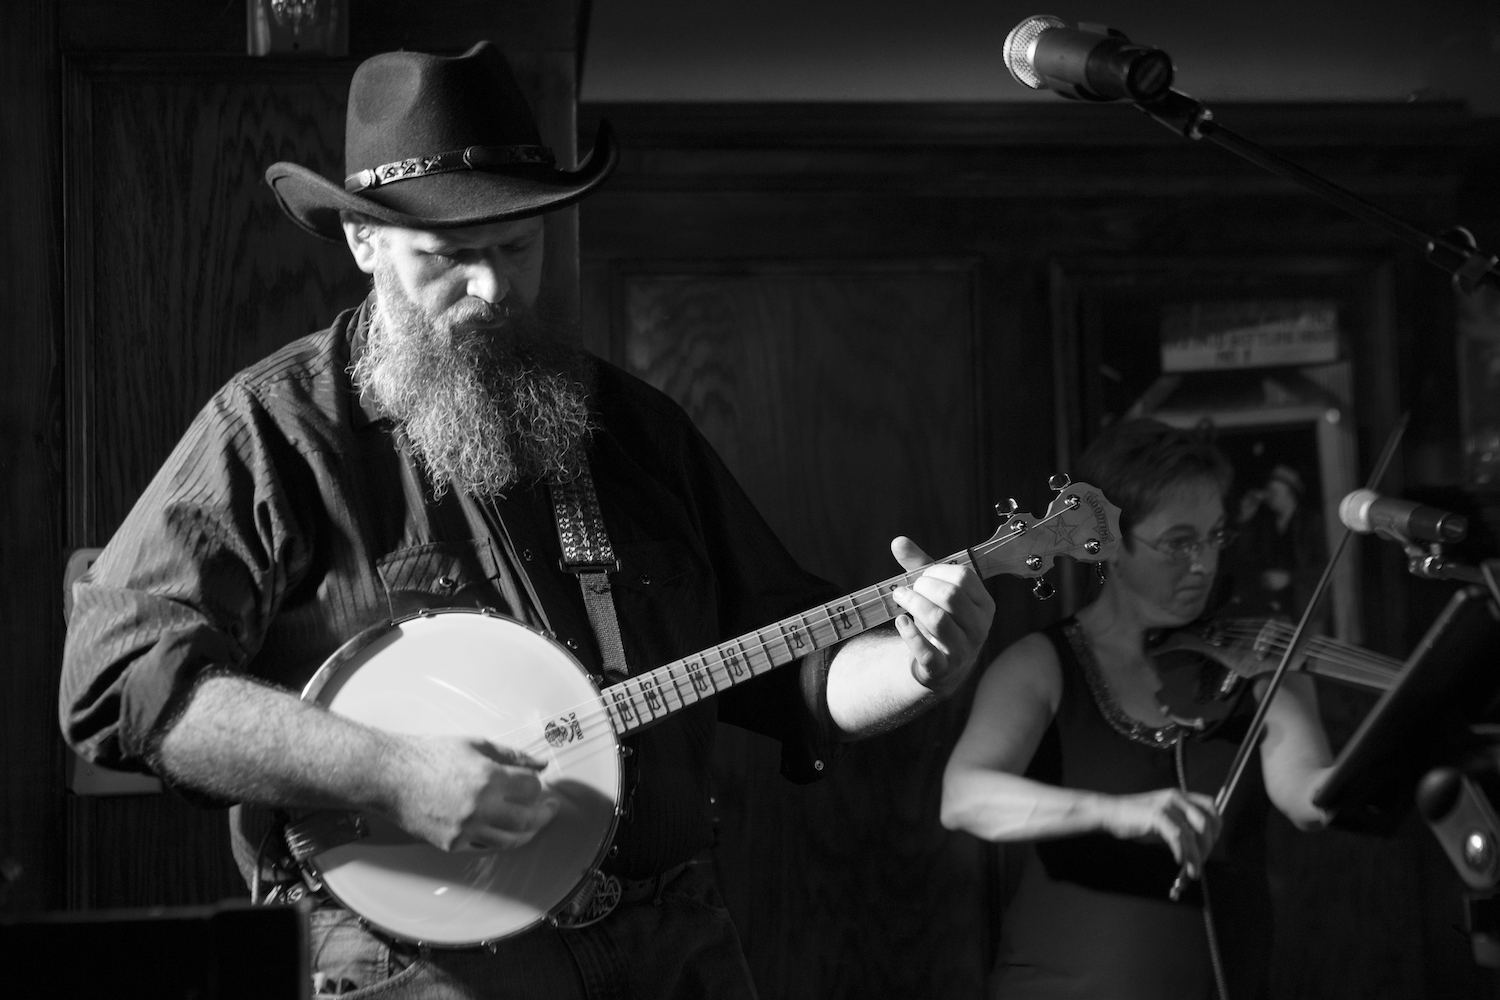 Man on stage with cowboy hat, large beard, and a tenor banjo